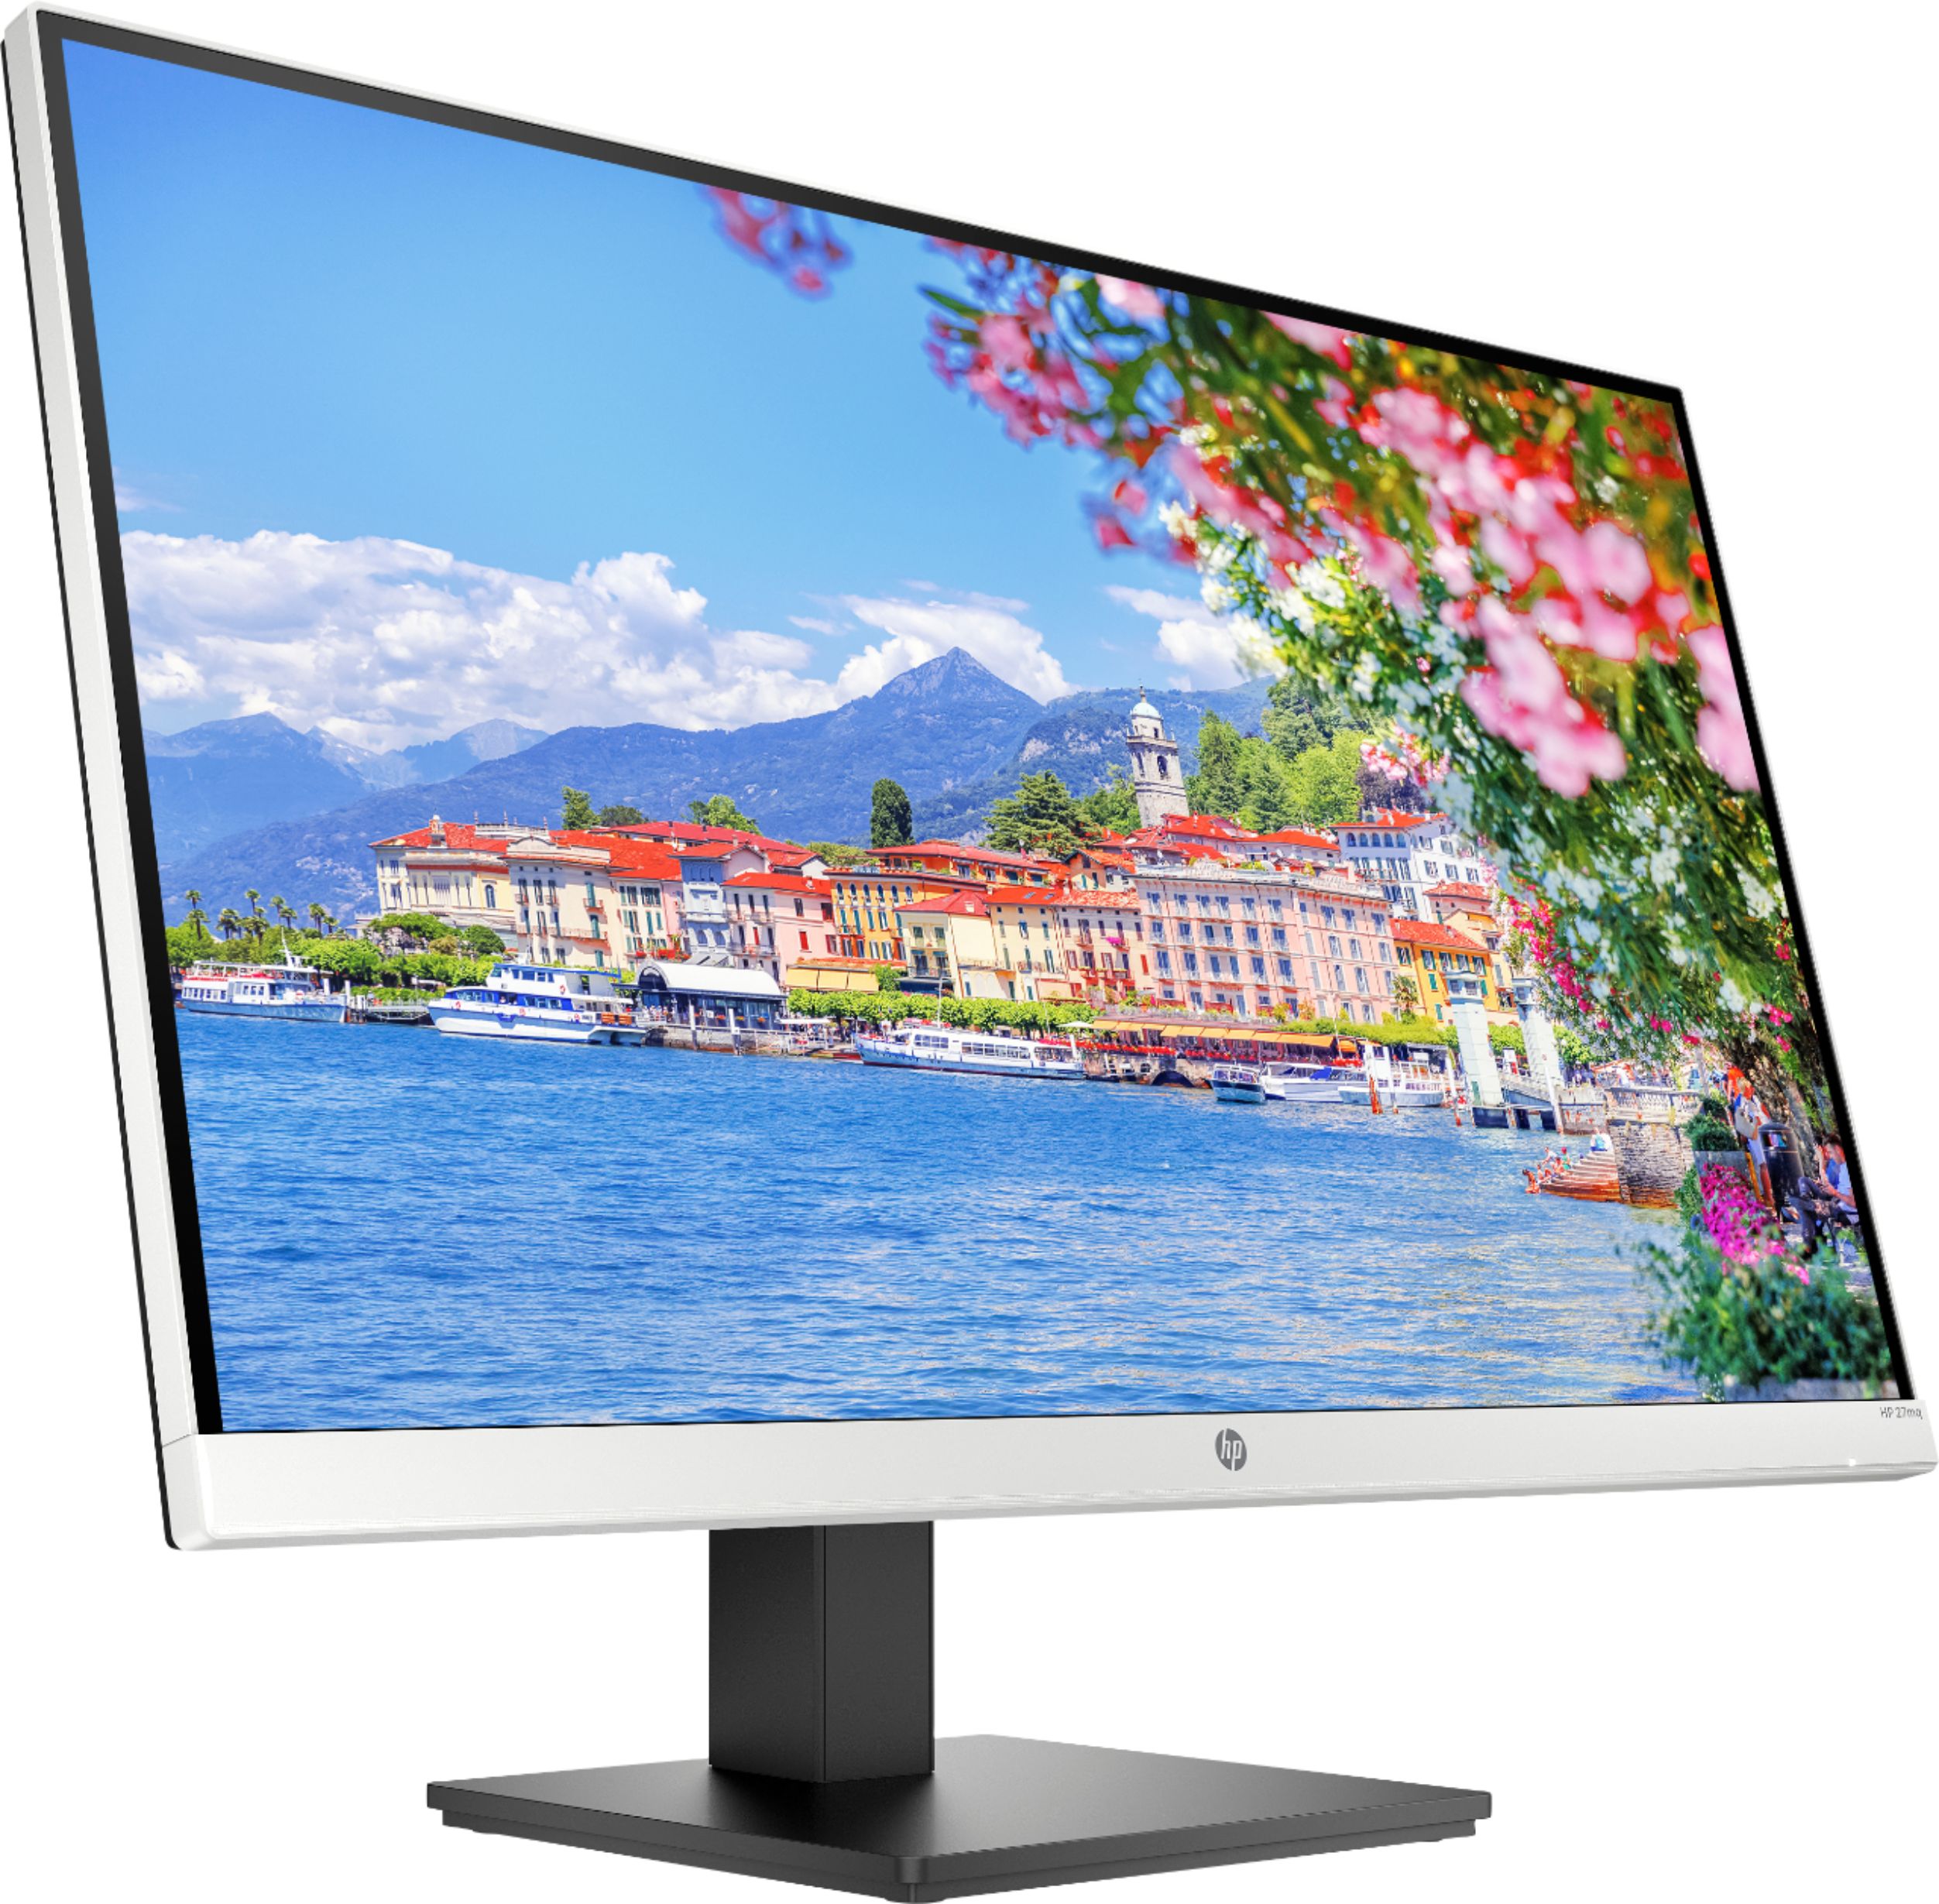 Angle View: HP - 27" IPS LED QHD Monitor with Adjustable Height (HDMI, VGA) - Silver & Black